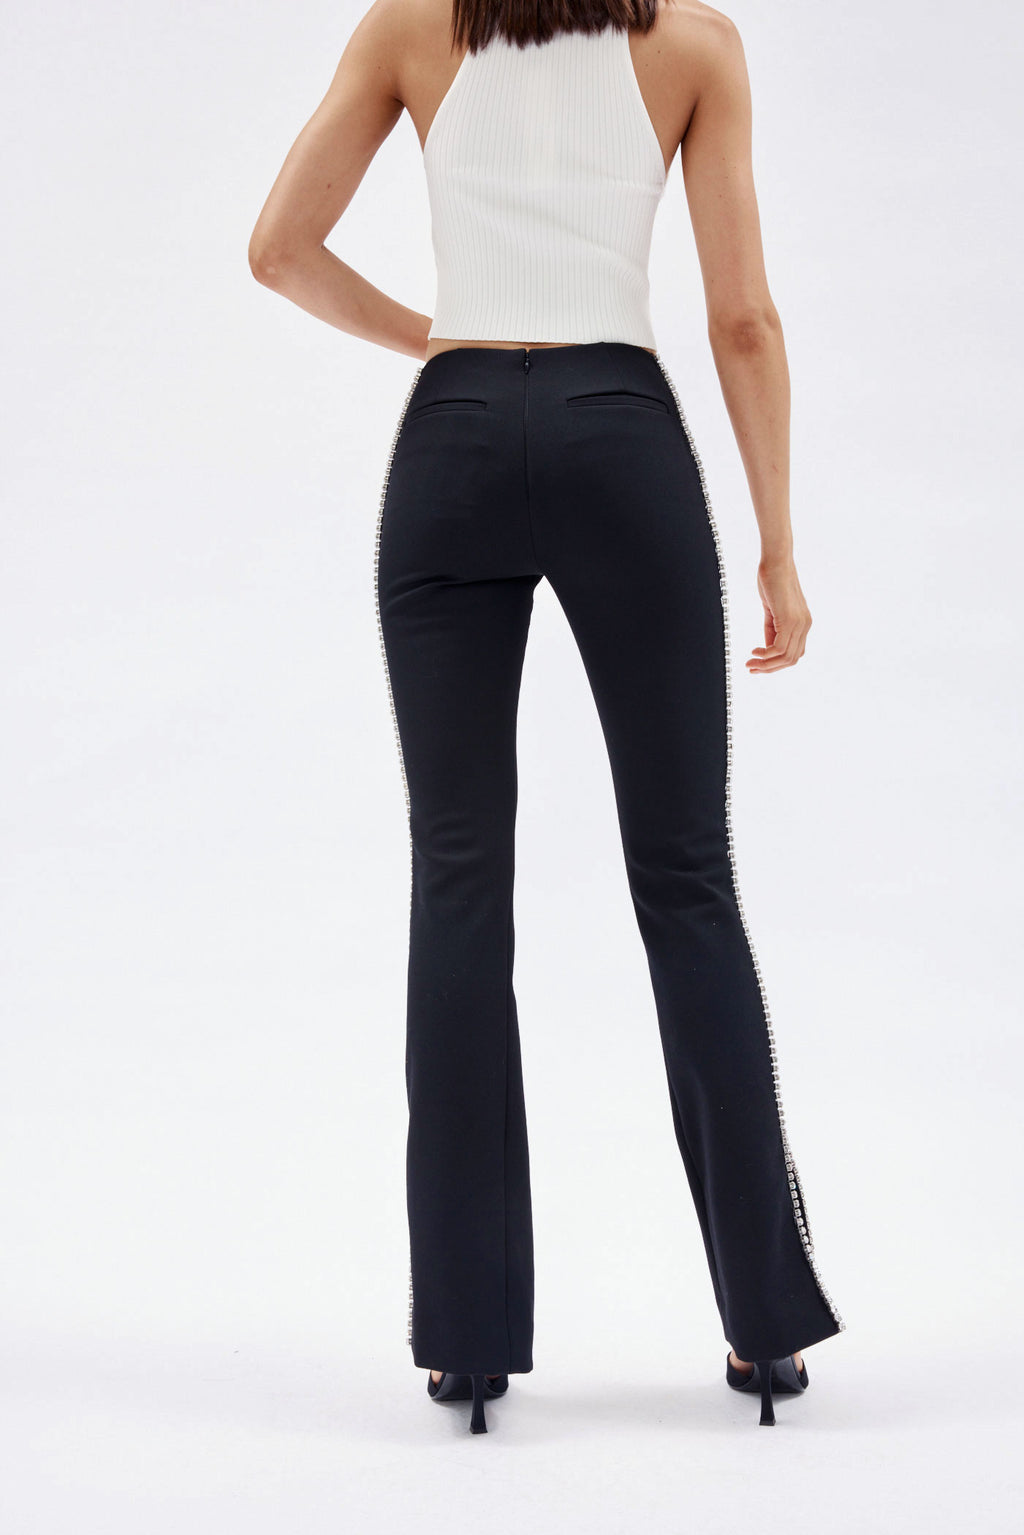 Slim Black Pant with Cage Strap Cutout